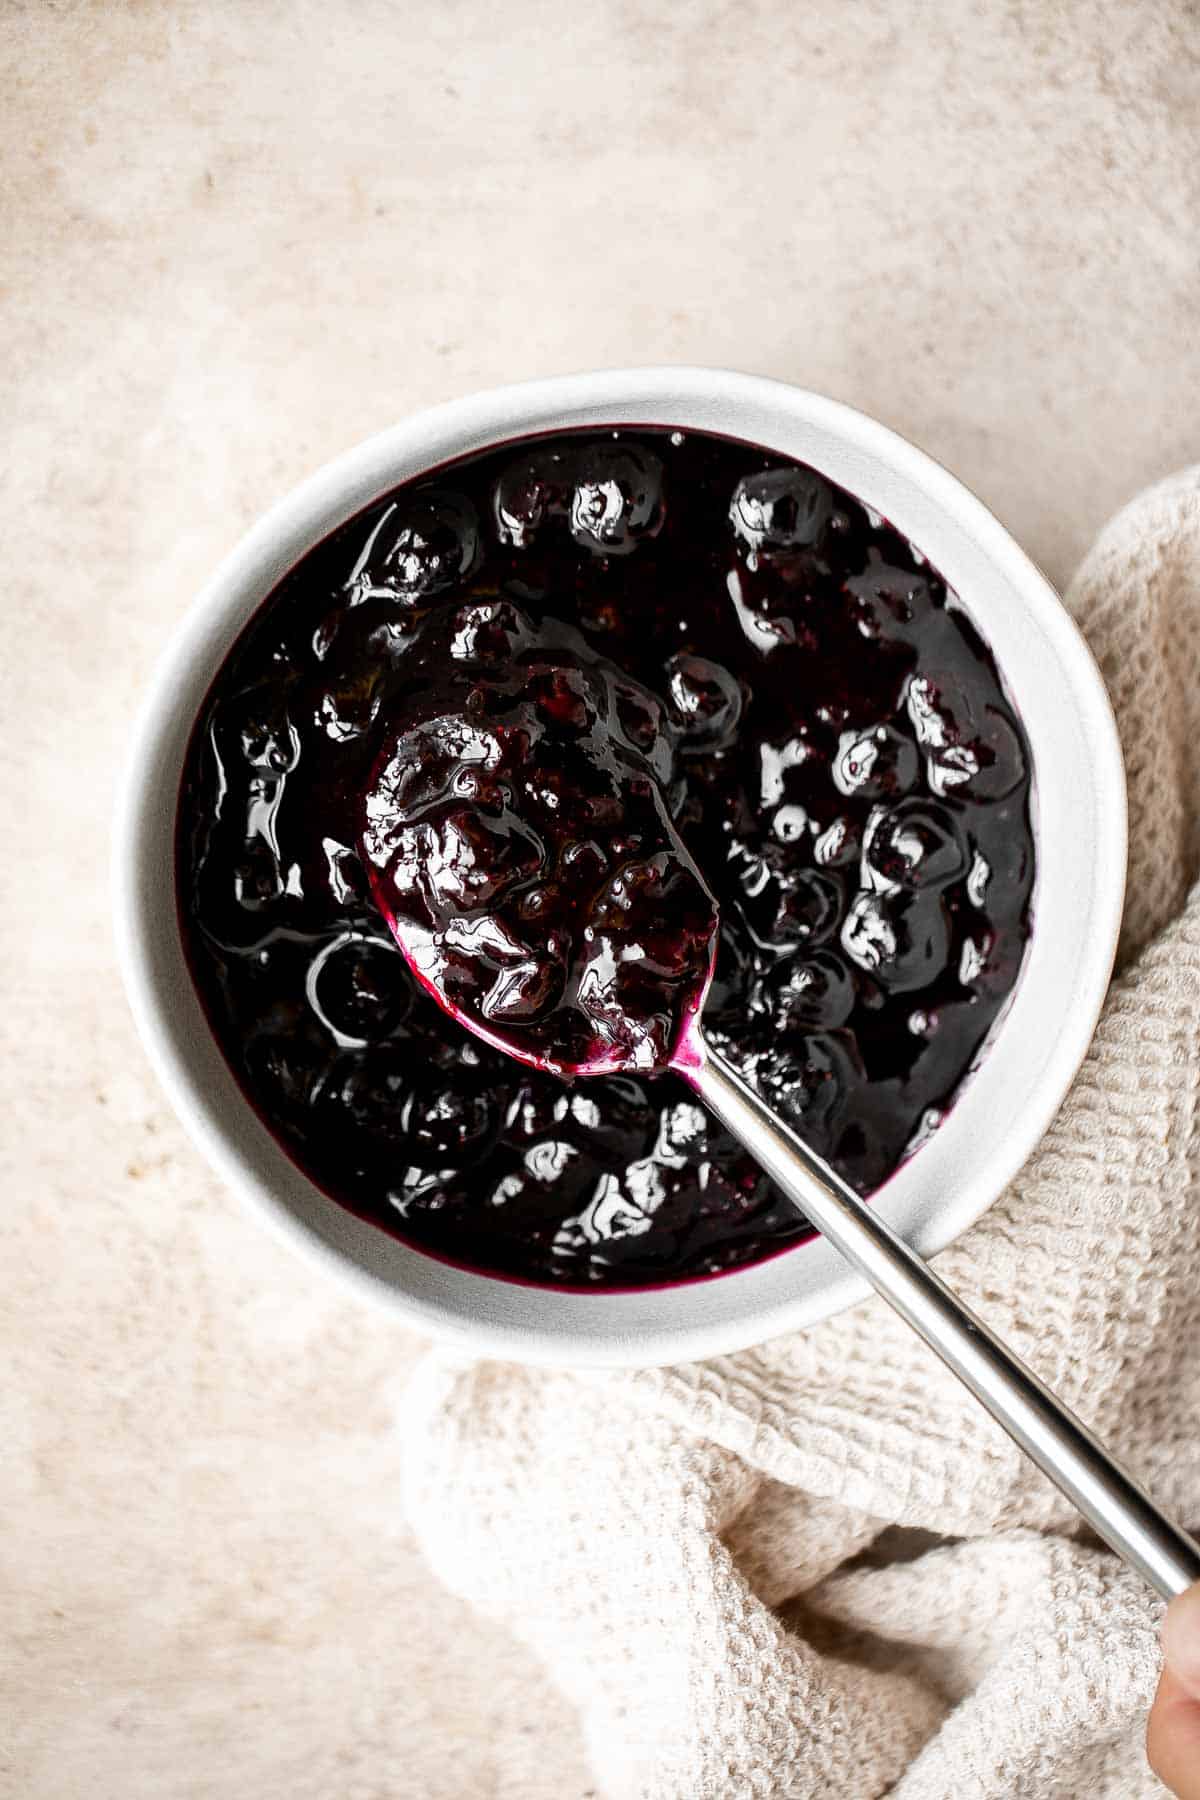 Blueberry Sauce is easy to make with a handful of simple ingredients in 15 minutes. It’s the perfect thick, fruity syrup to add to breakfast or dessert. | aheadofthyme.com